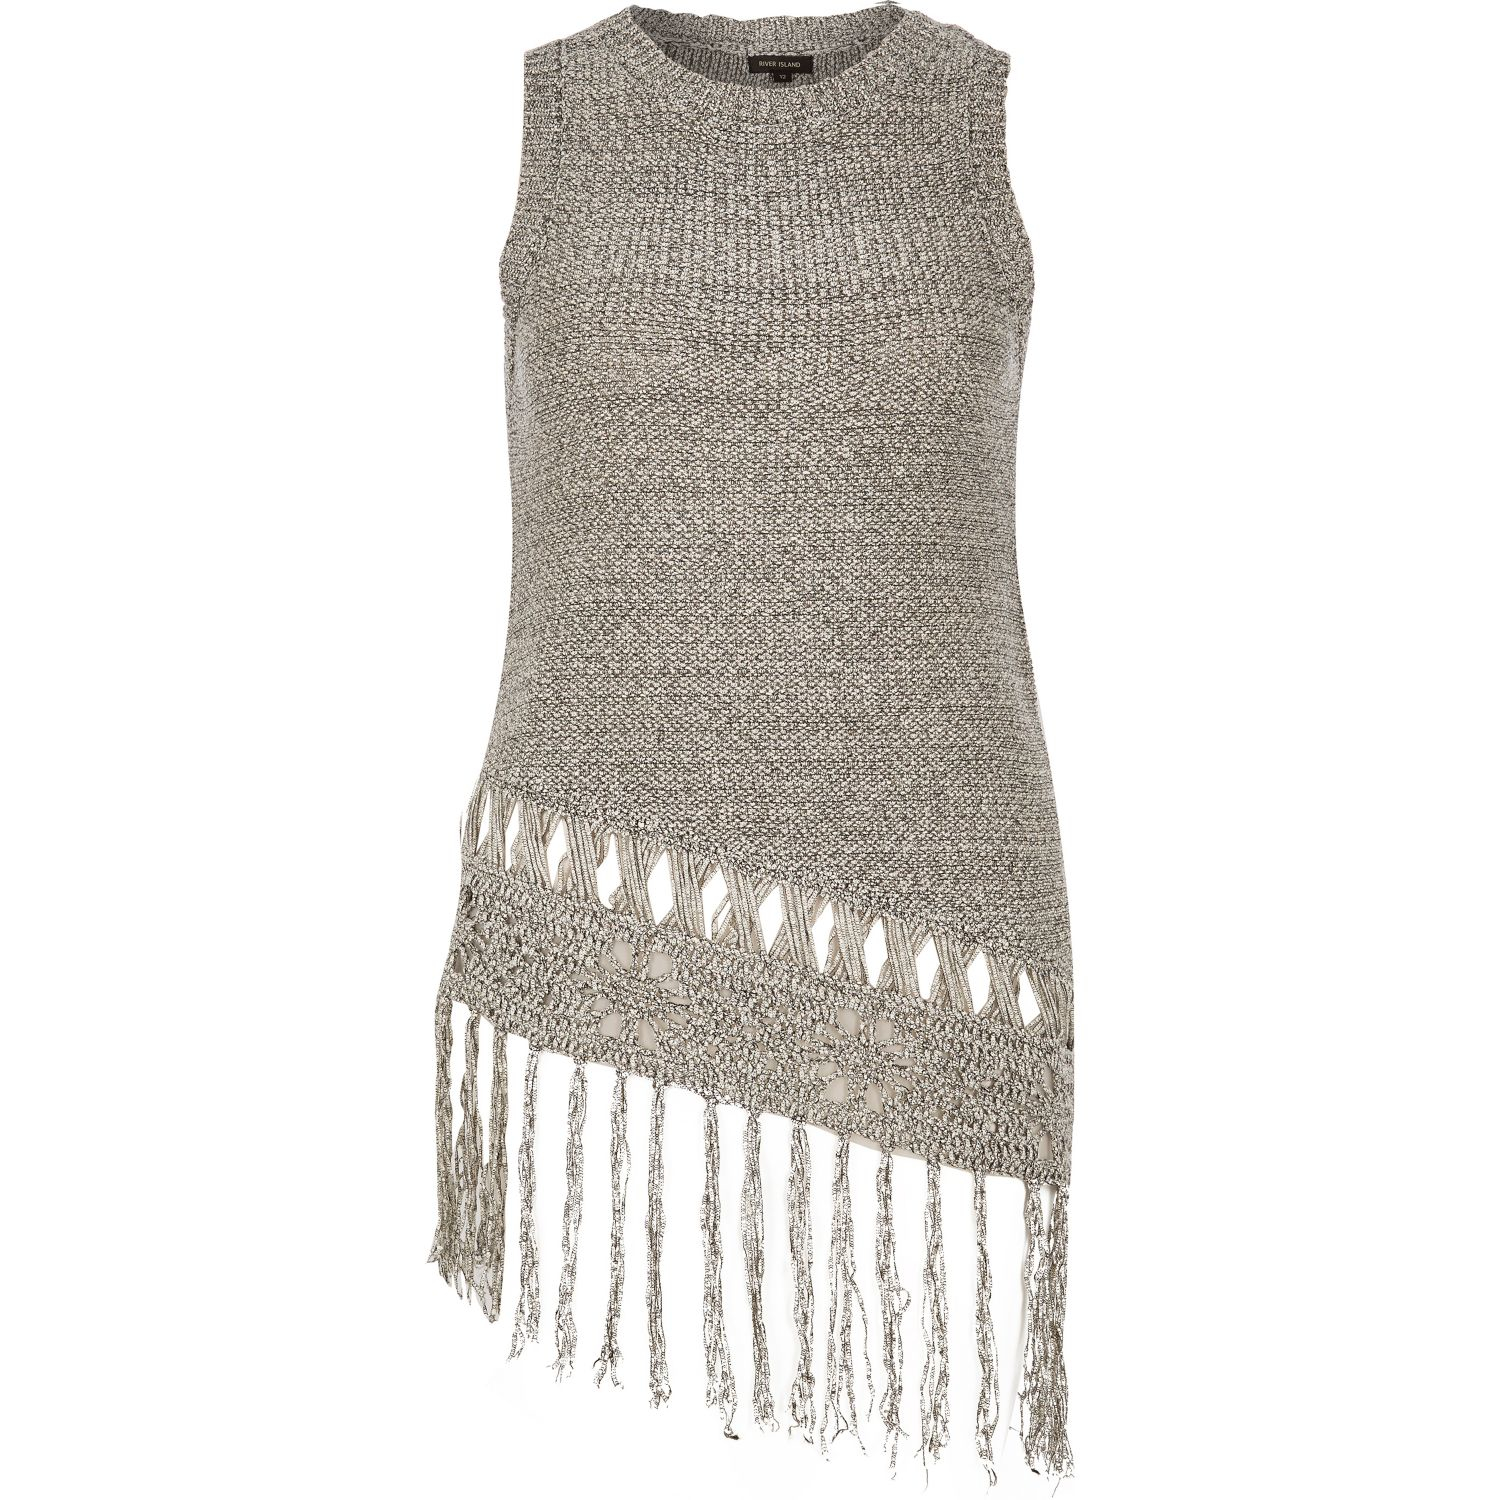 Knitted Dress River Island : 25+ Images 2017-2018